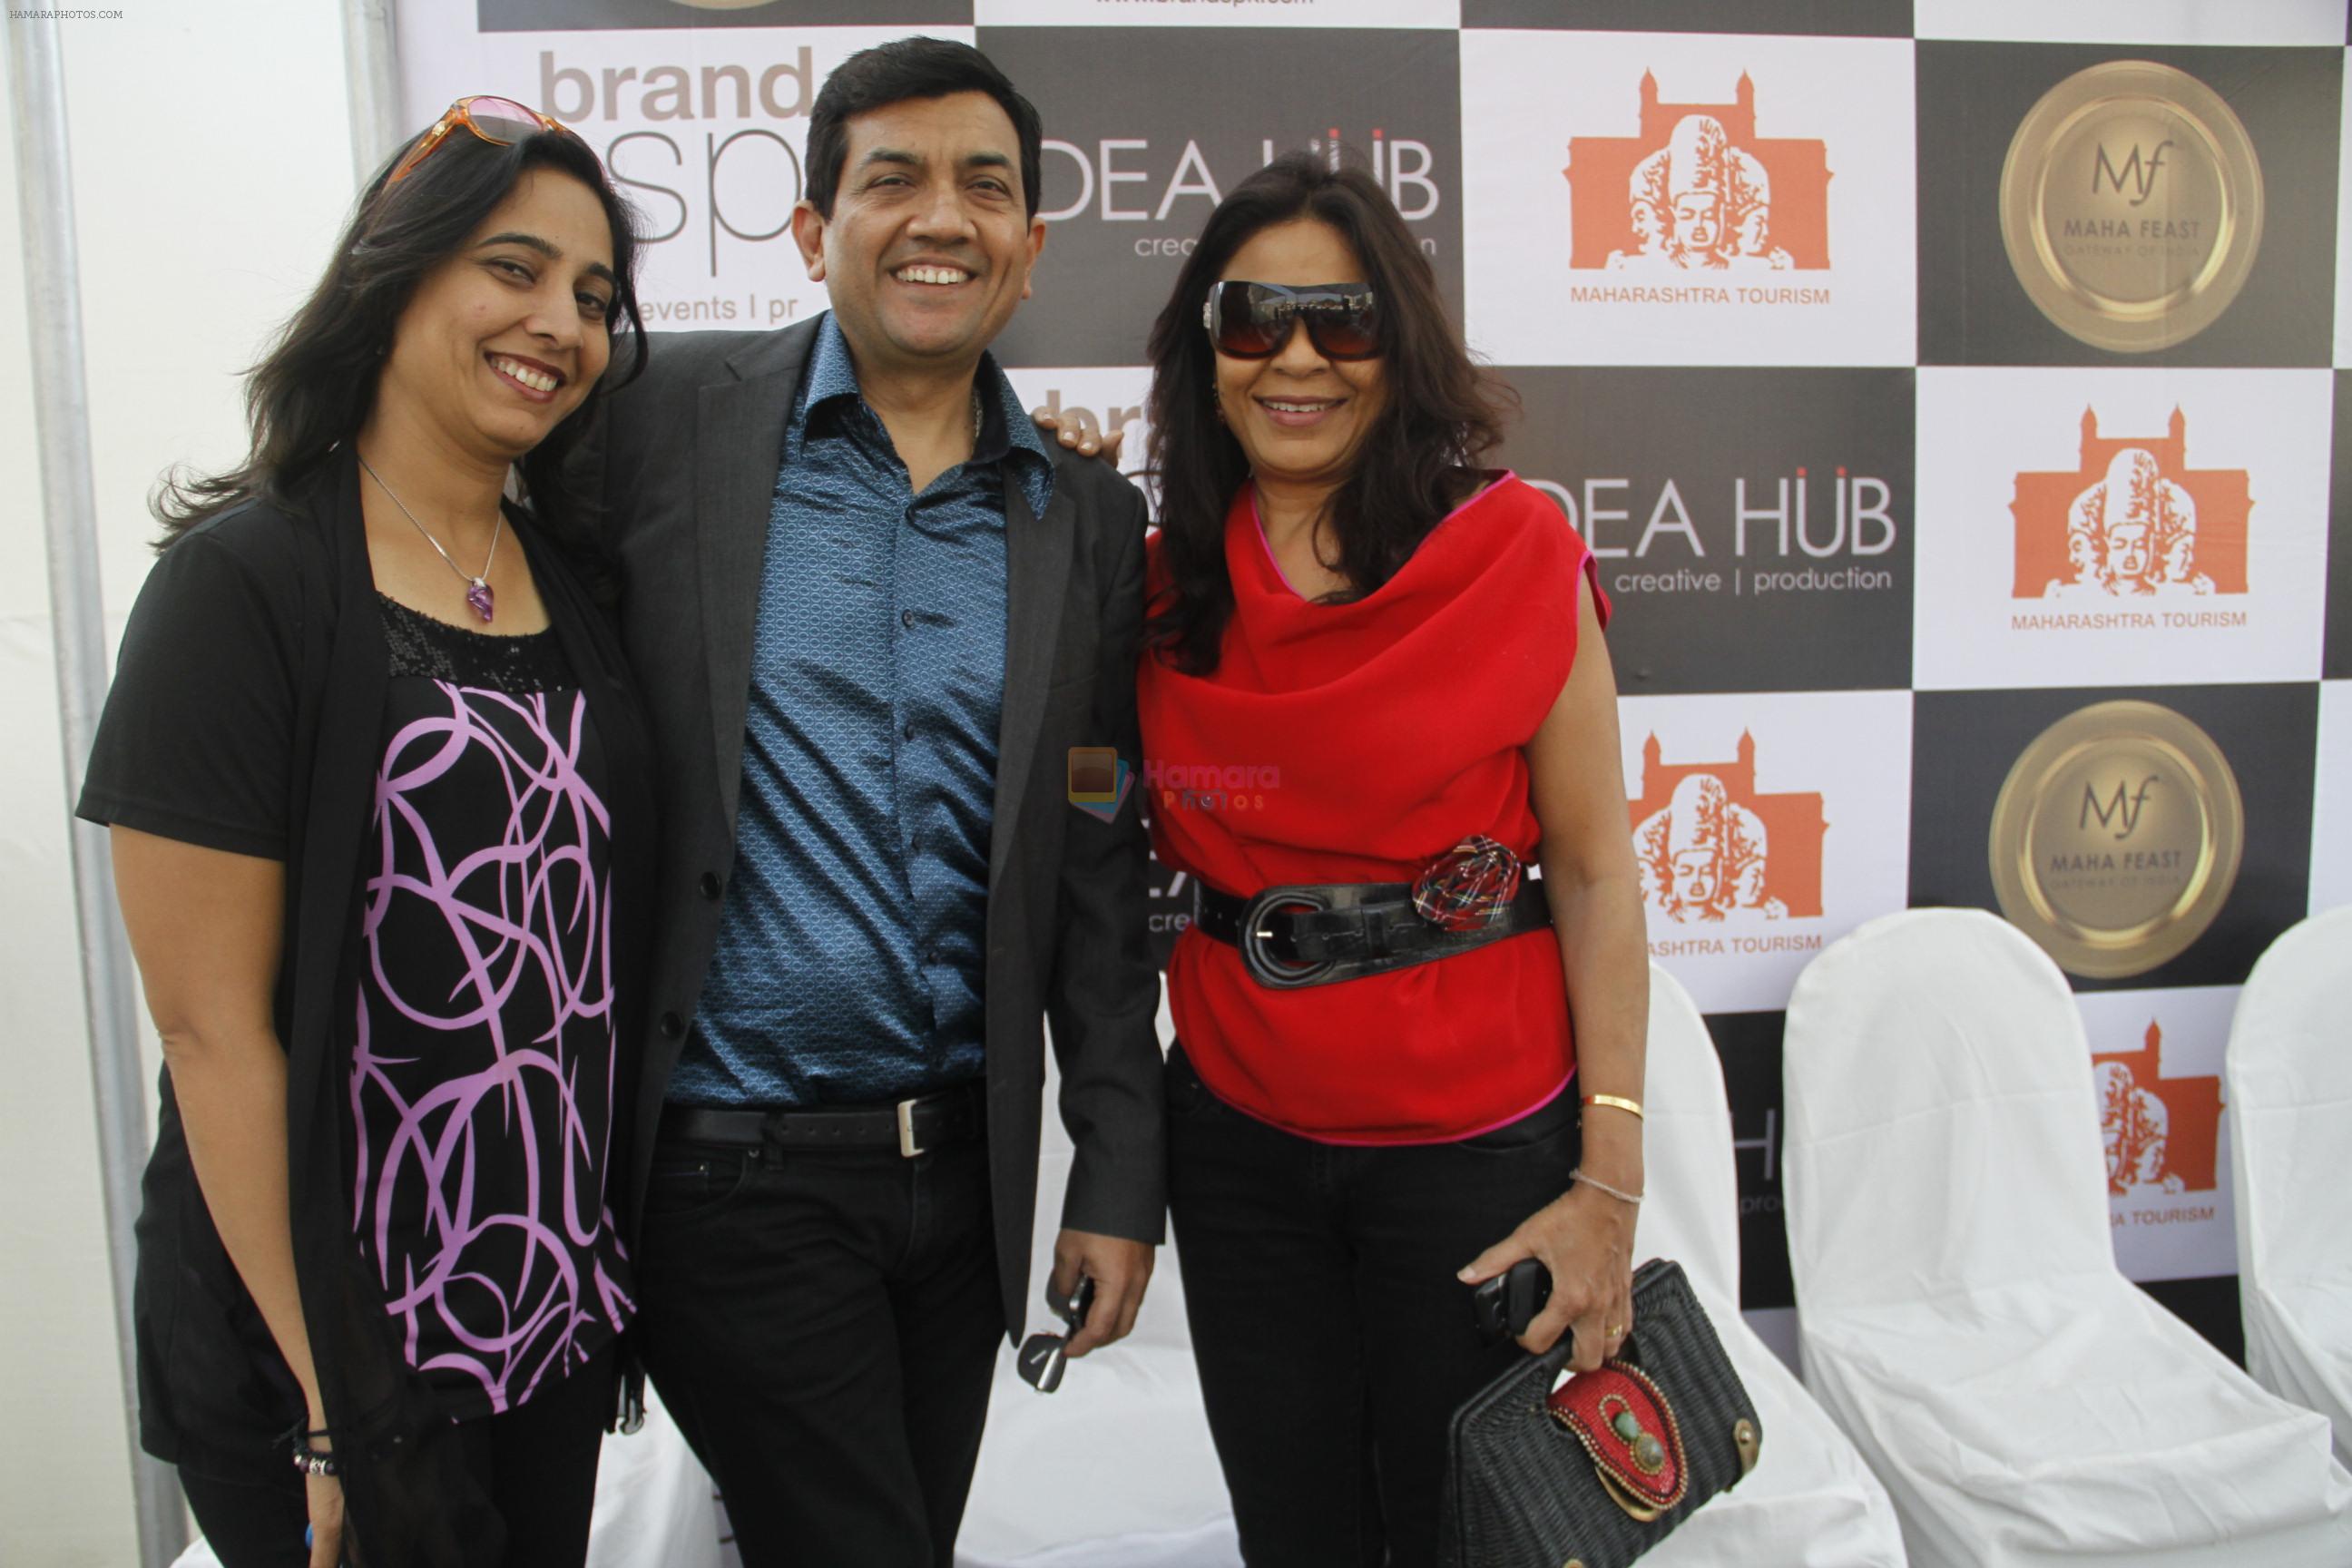 Sanjeev Kapoor with his wife Alyona and Rashmi Uday Singh at Maha Feast - Biggest Outdoor Food Festival in Mumbai on 24th Dec 2011